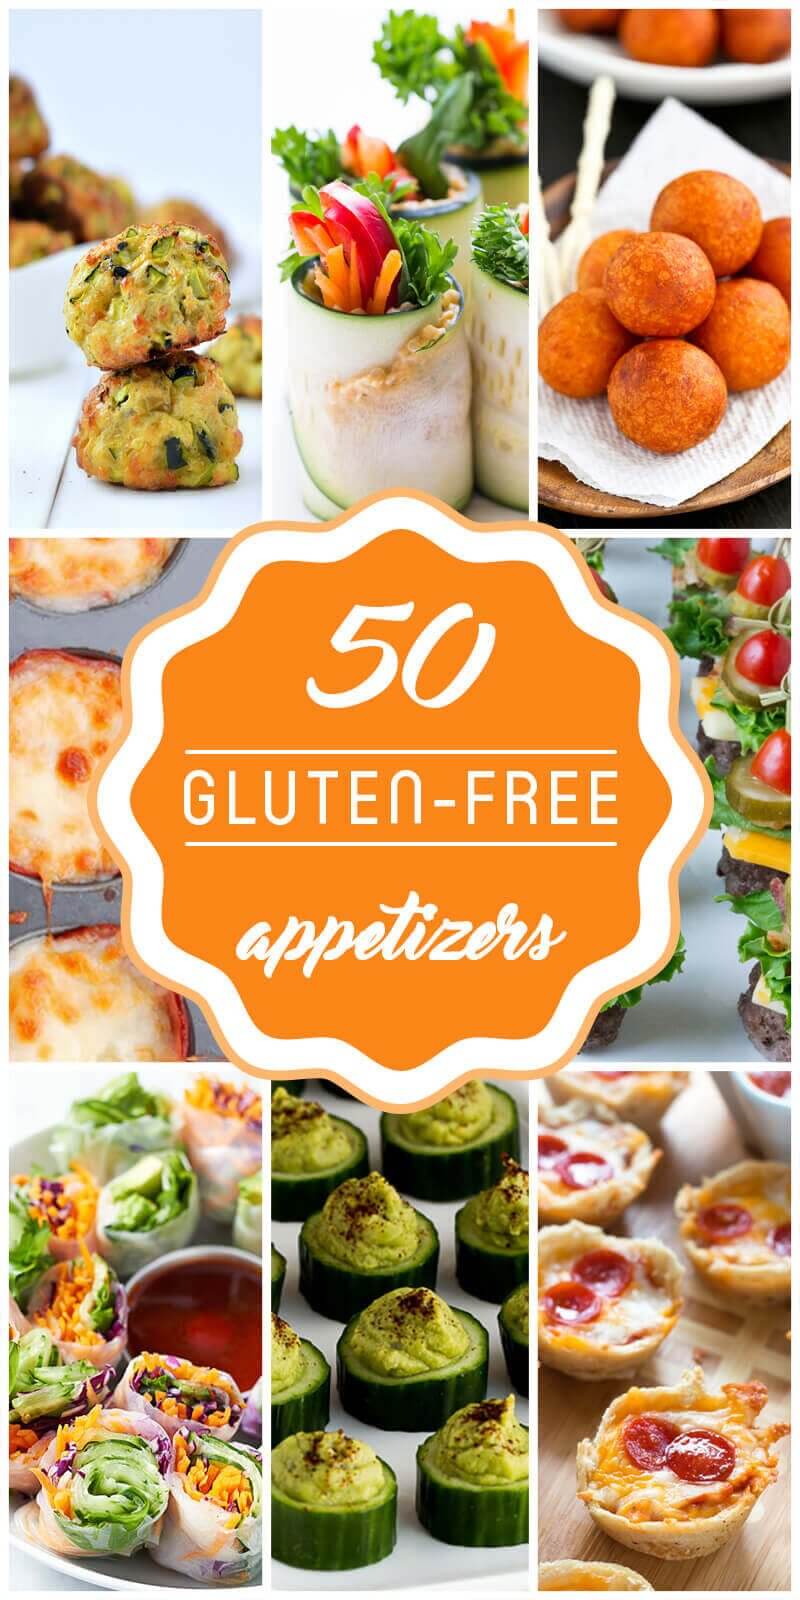 50 Best Gluten-Free Appetizer Recipes to Serve for Your Guests in 2020